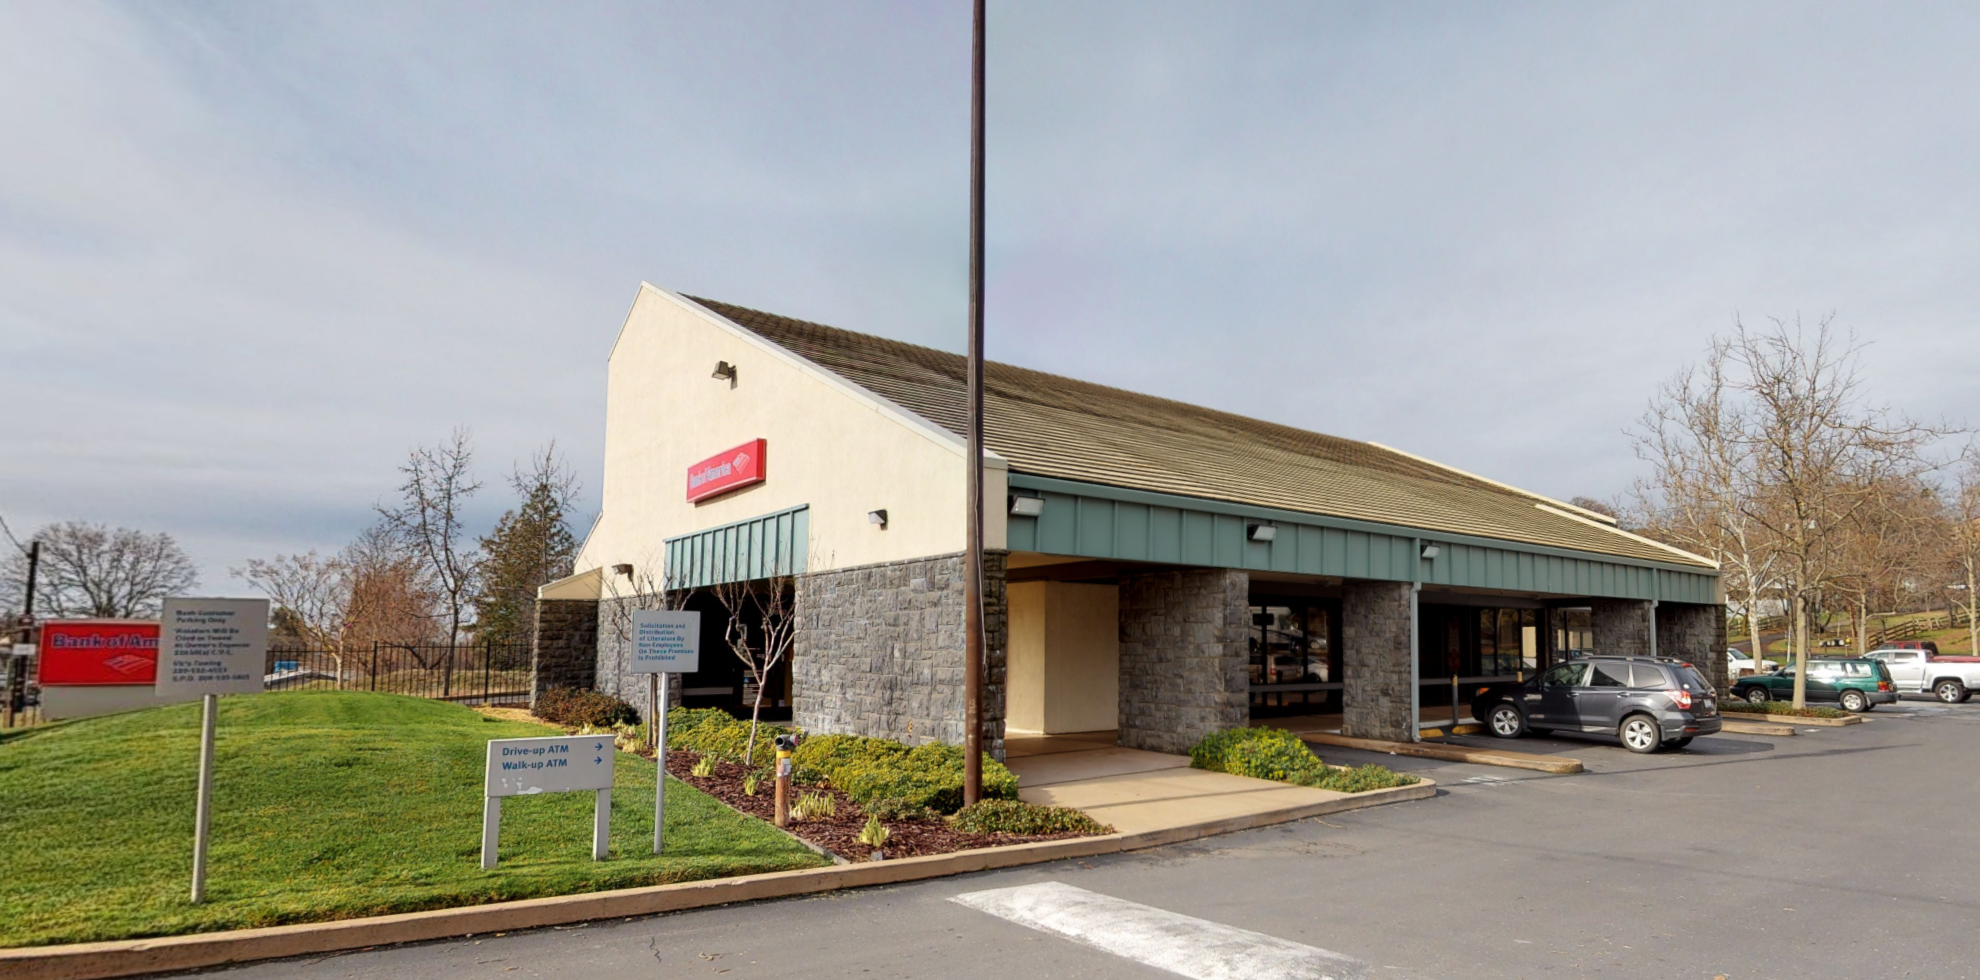 Bank of America financial center with drive-thru ATM | 14830 Mono Way, Sonora, CA 95370